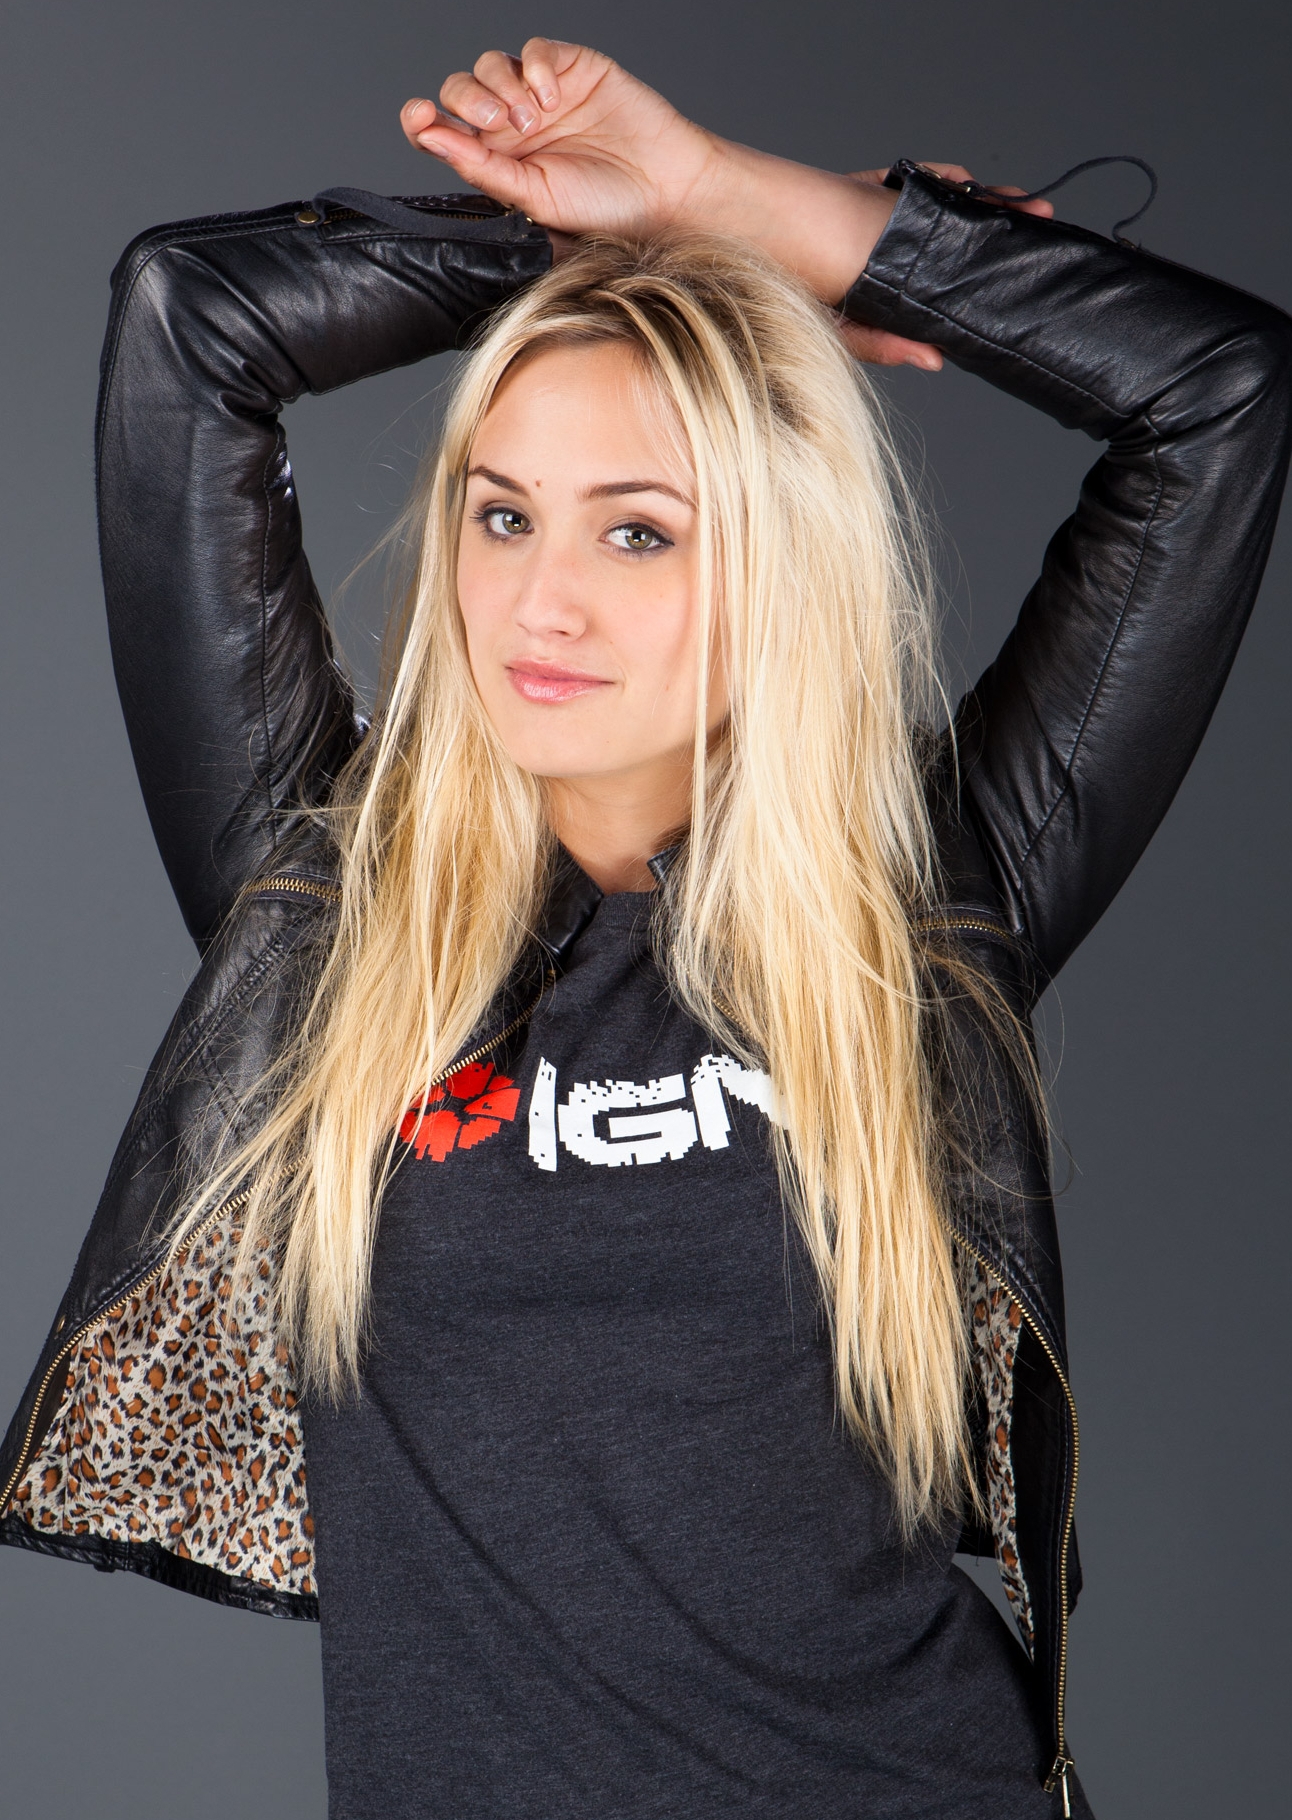 Naomi Kyle Wallpaper For Android